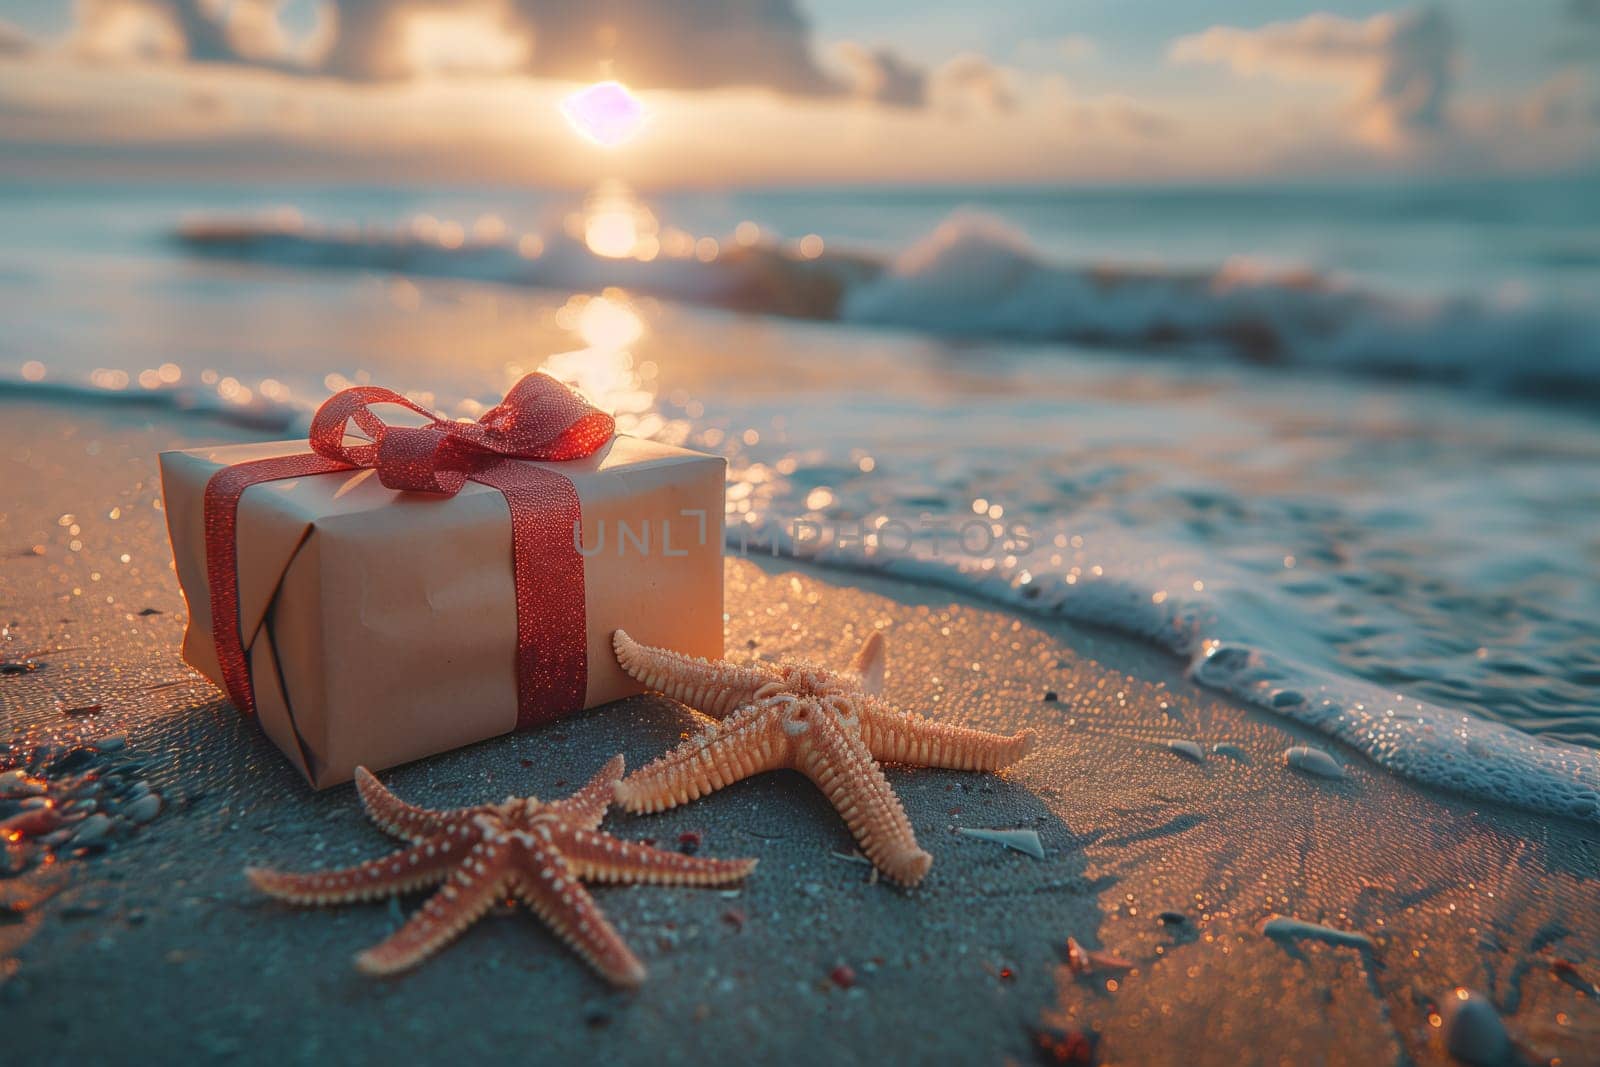 A gift box and starfish rest on the sandy beach near the vast ocean under the clear blue sky. The natural landscape is a mix of art and leisure, offering a serene view for travelers